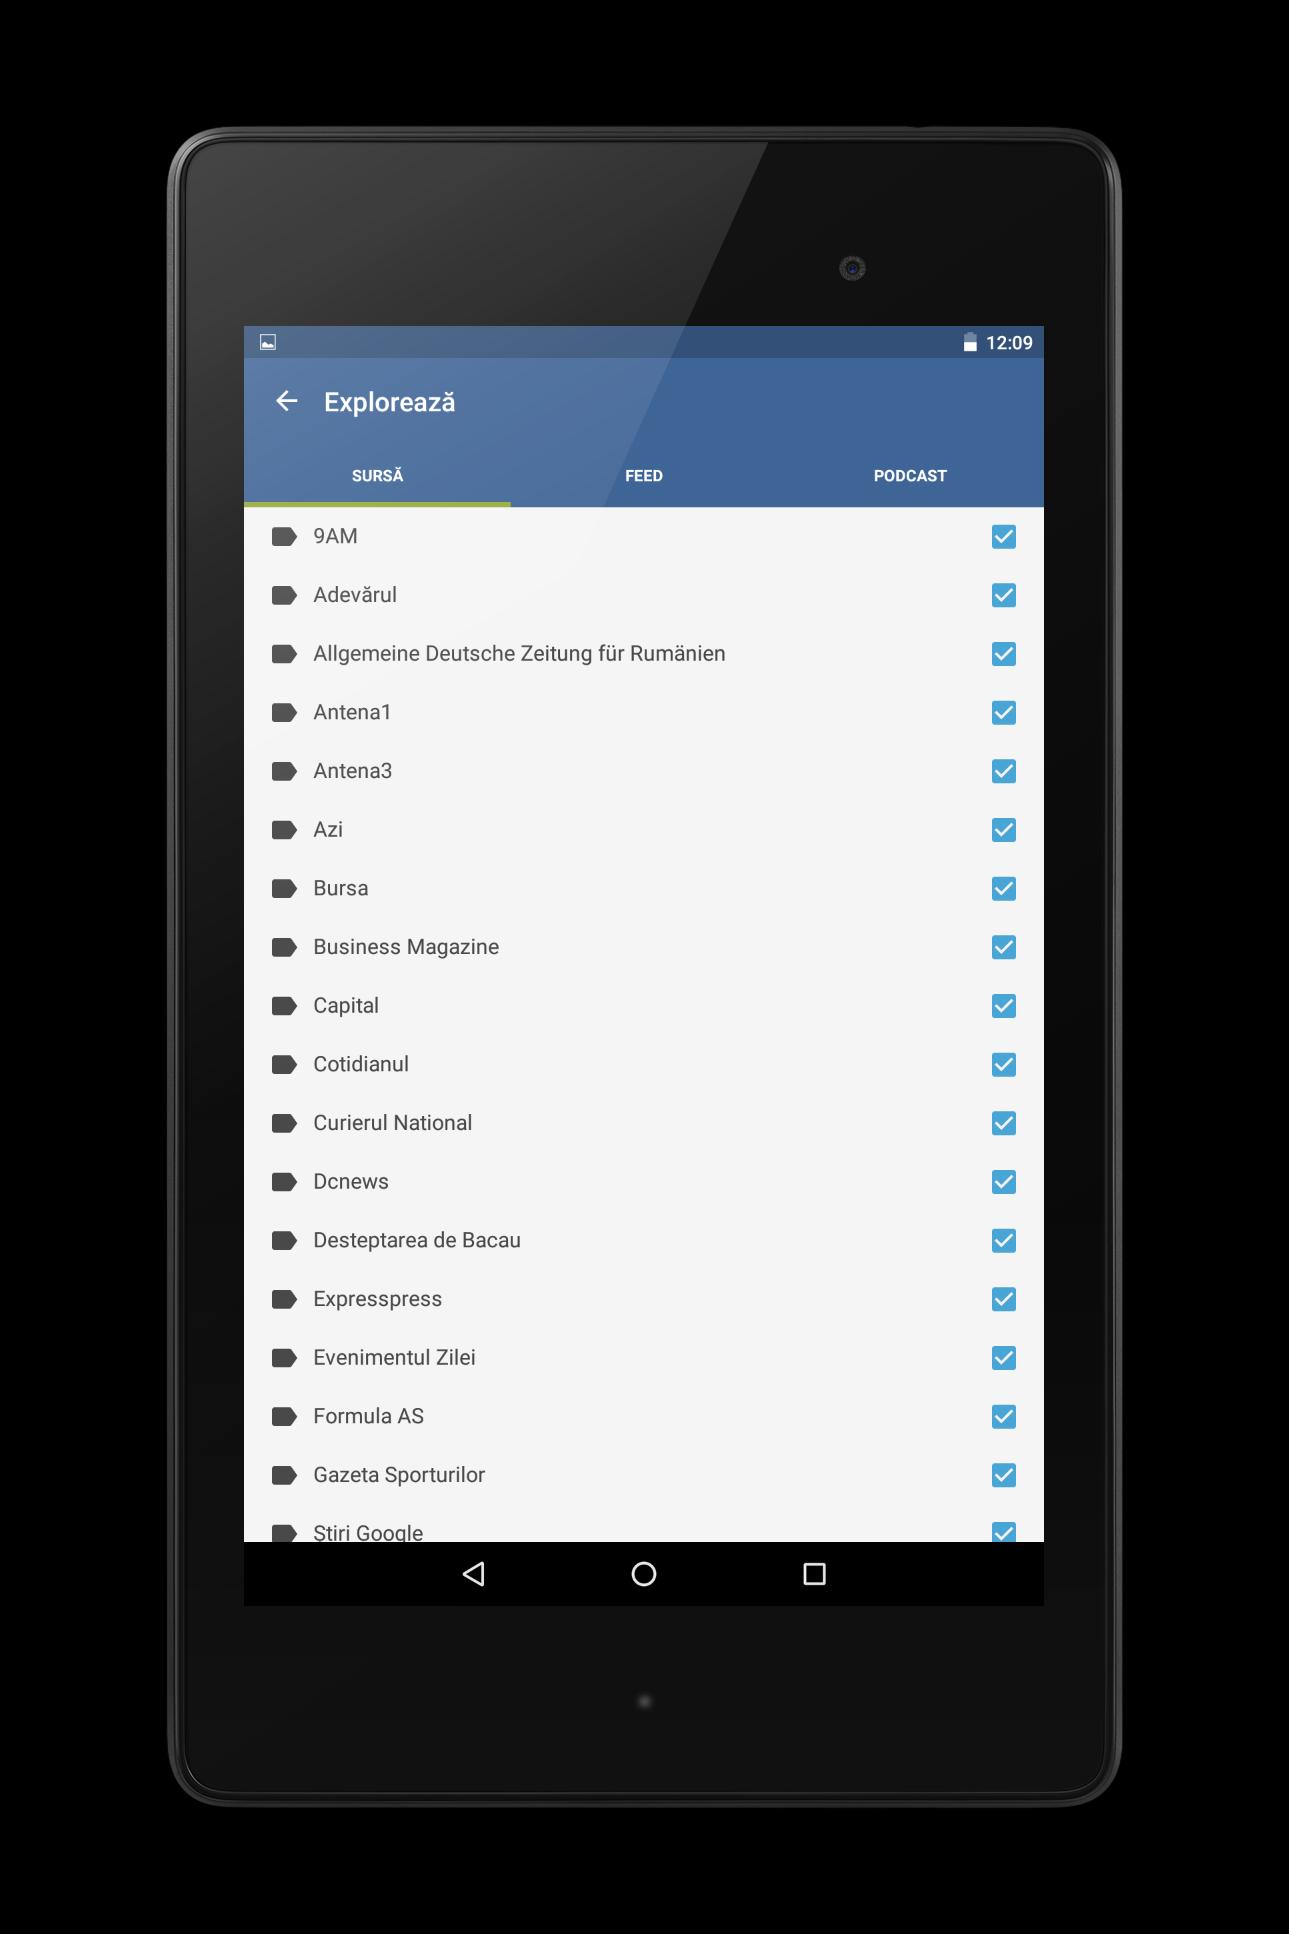 Romania News For Android Apk Download